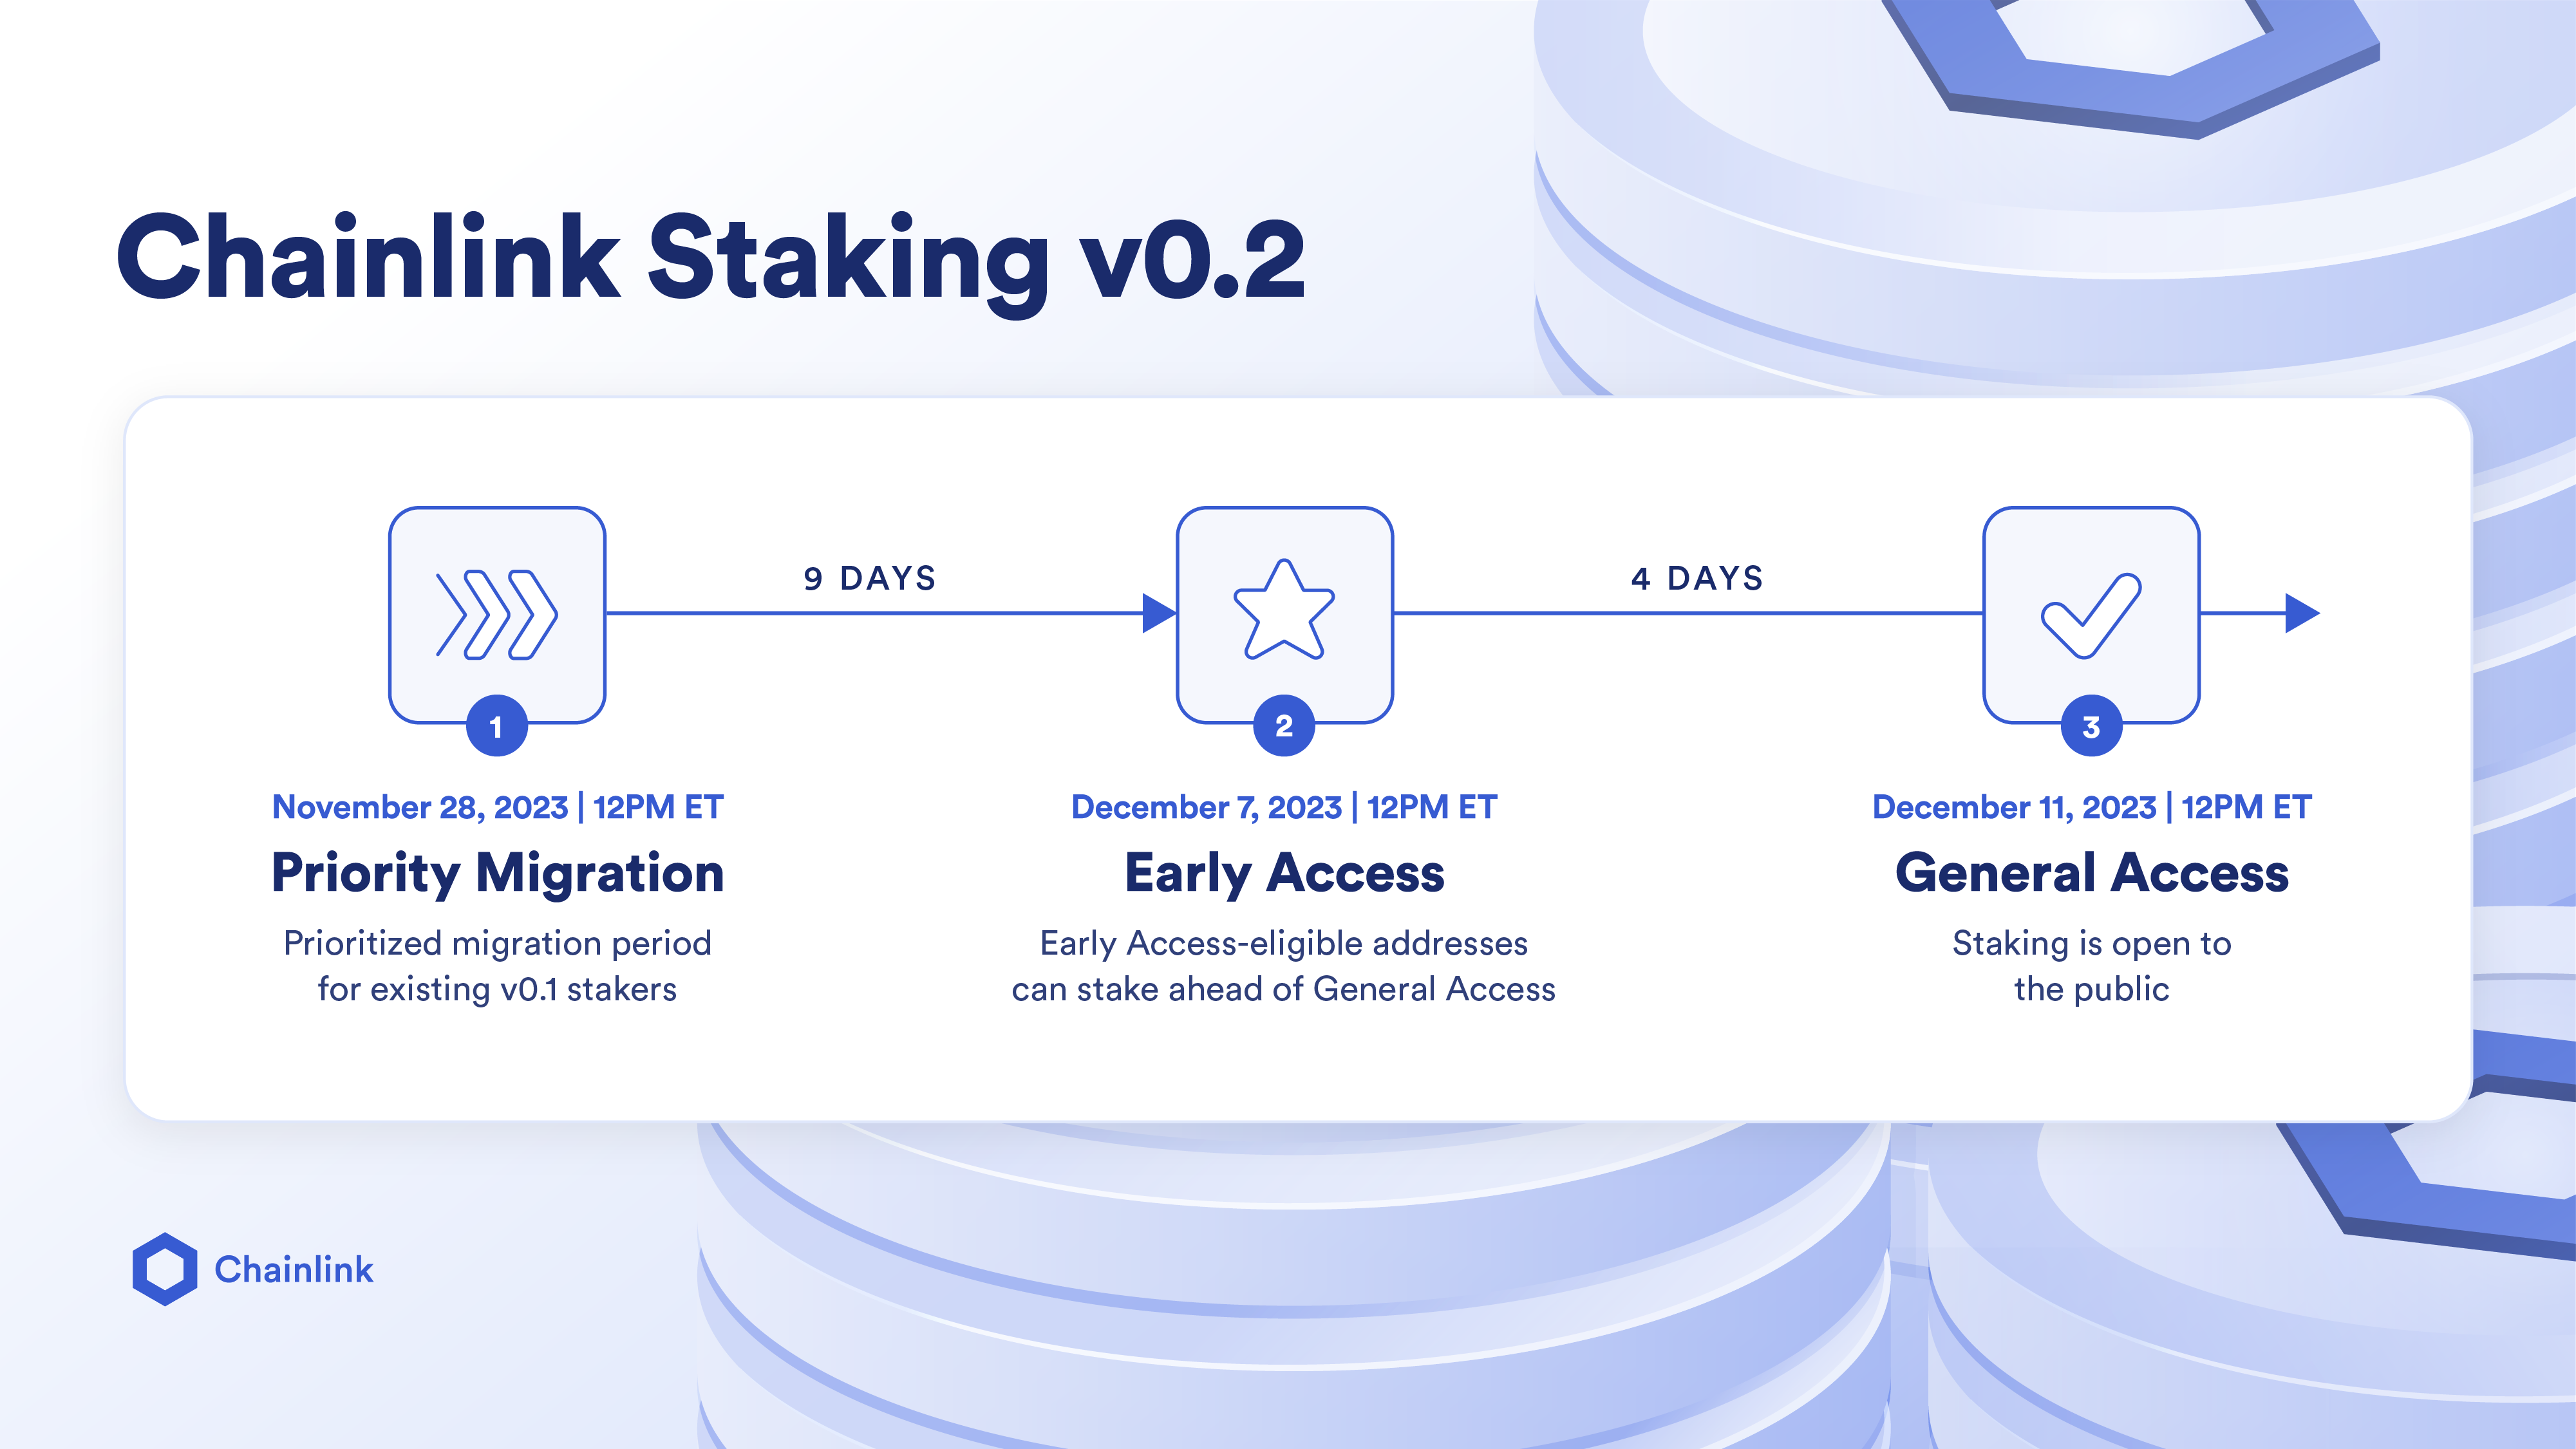 Chainlink Staking v0.2 launch process